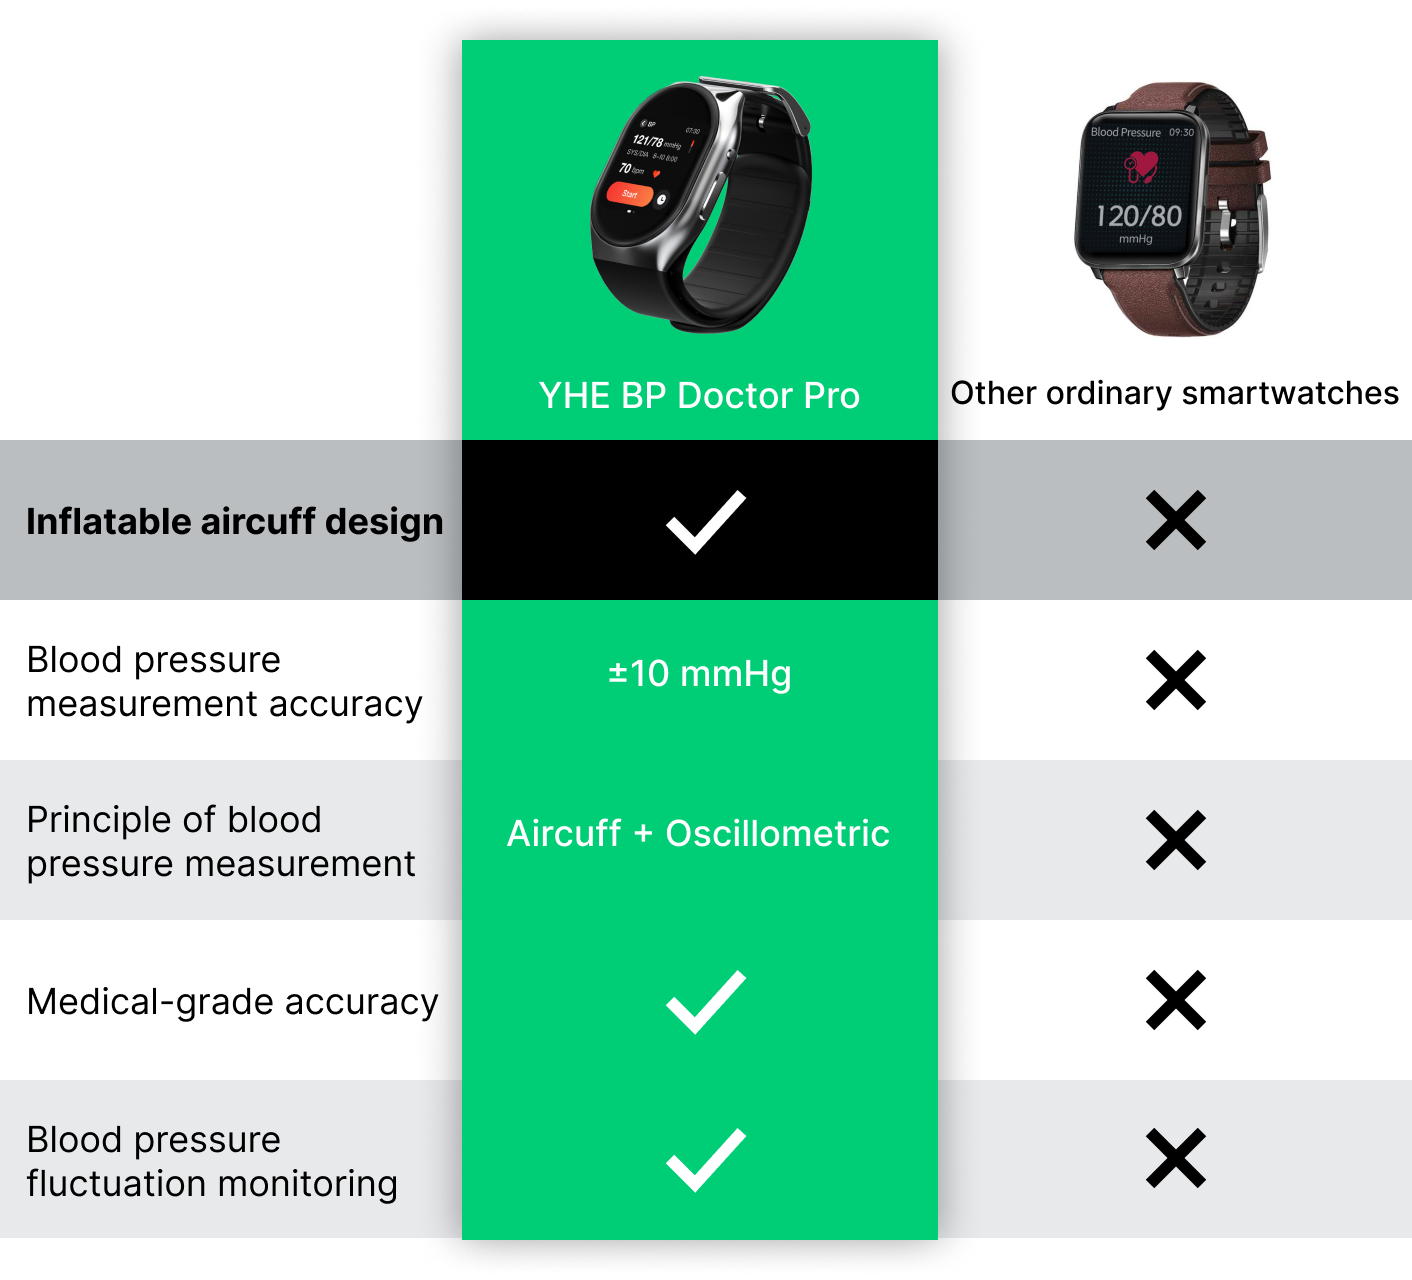 YHE BP Doctor Full Review: Affordable and accurate - Digital